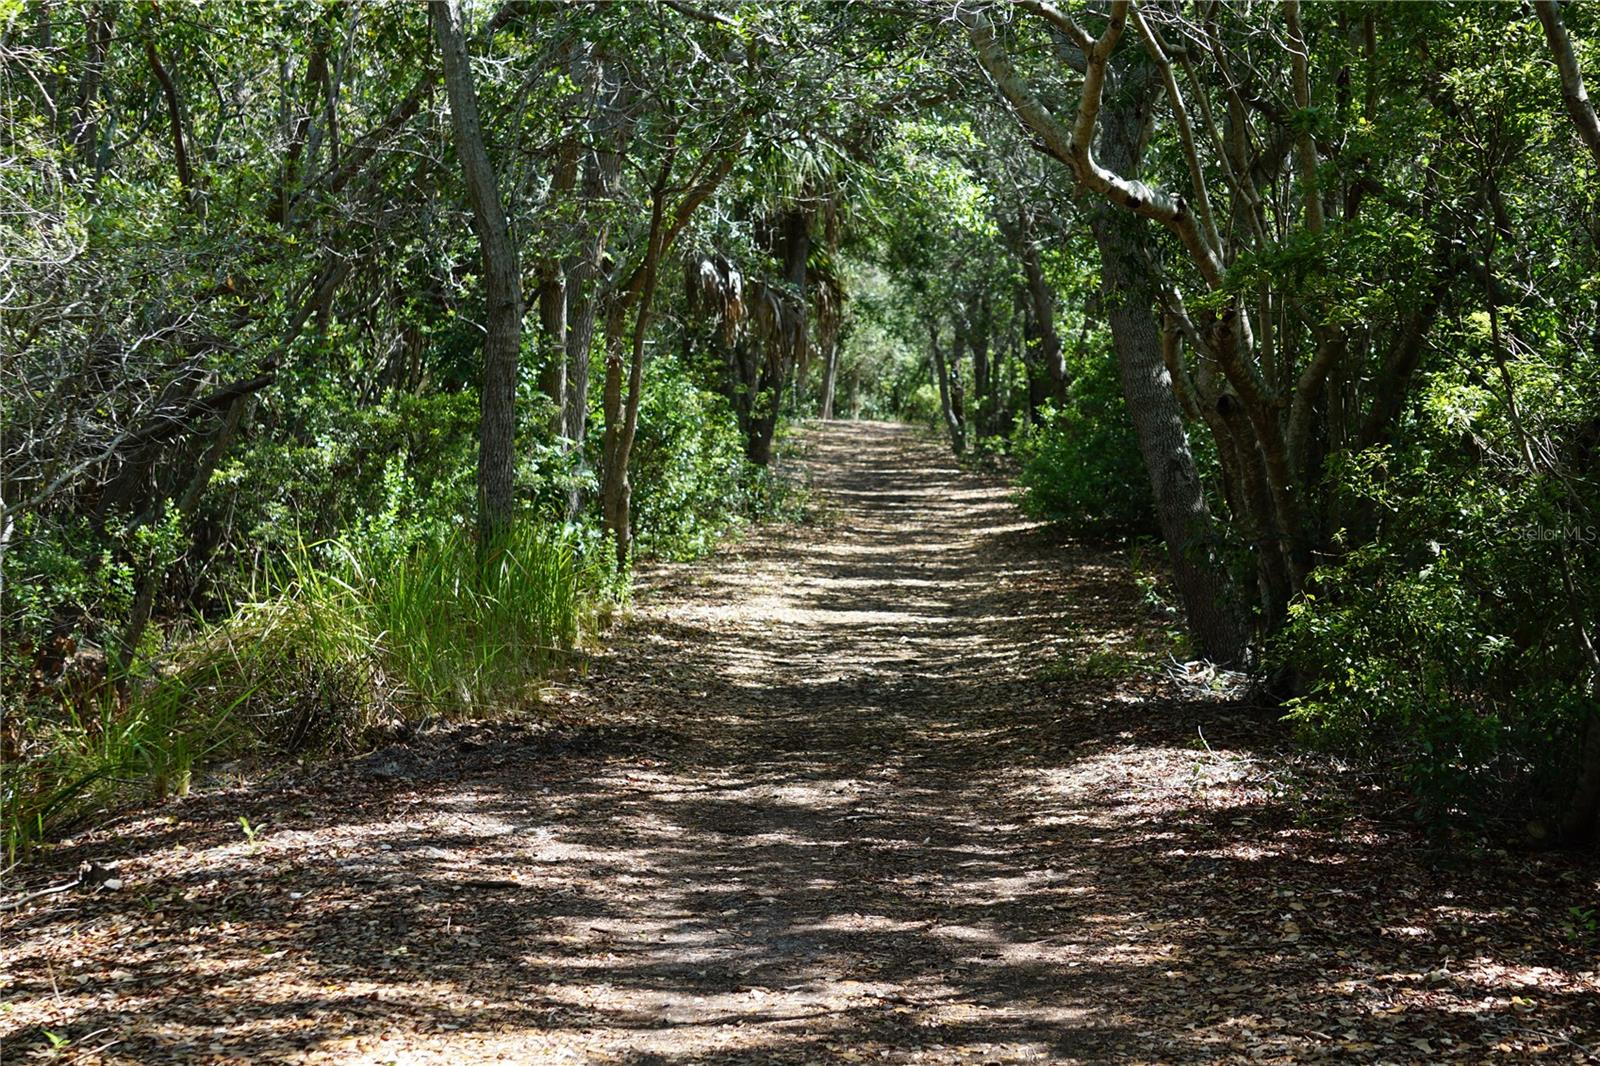 The Shores of Long Bayou nature trail